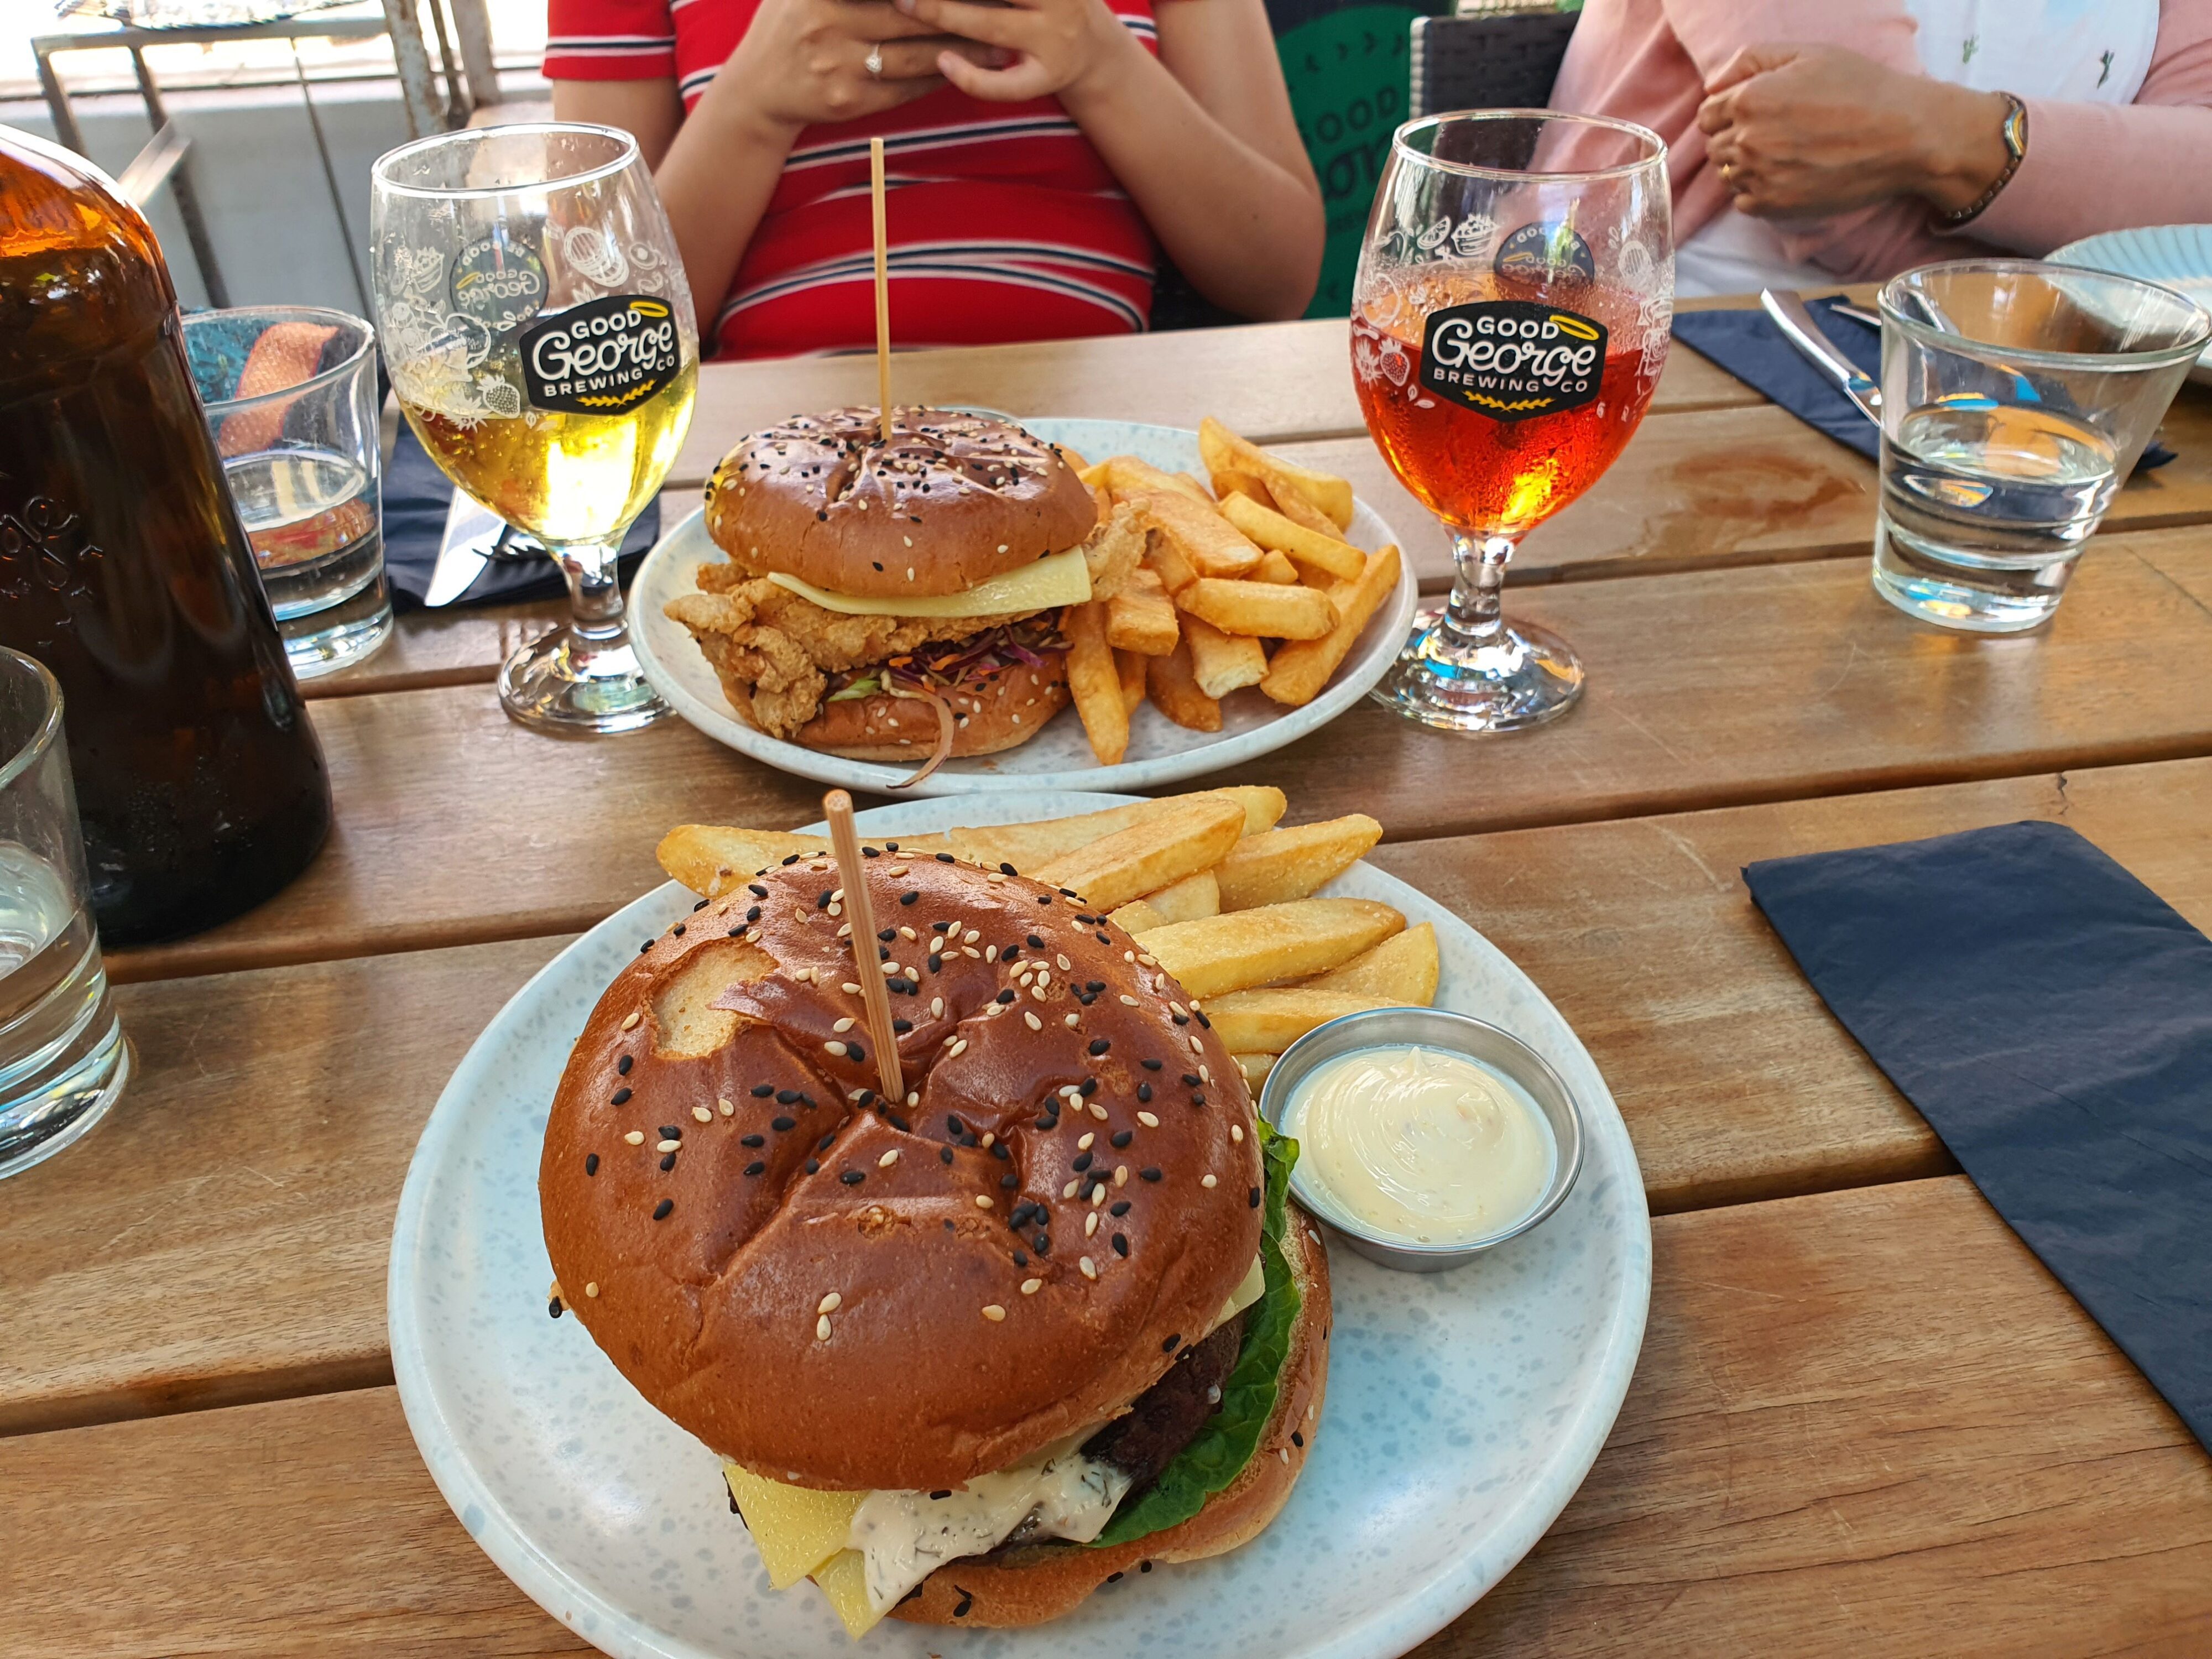 Photo of a lunch meal at Good George Brewing Co, Cambridge, Waikato, New Zealand. Food items pictured are burgers, fries, and two glasses of cider.